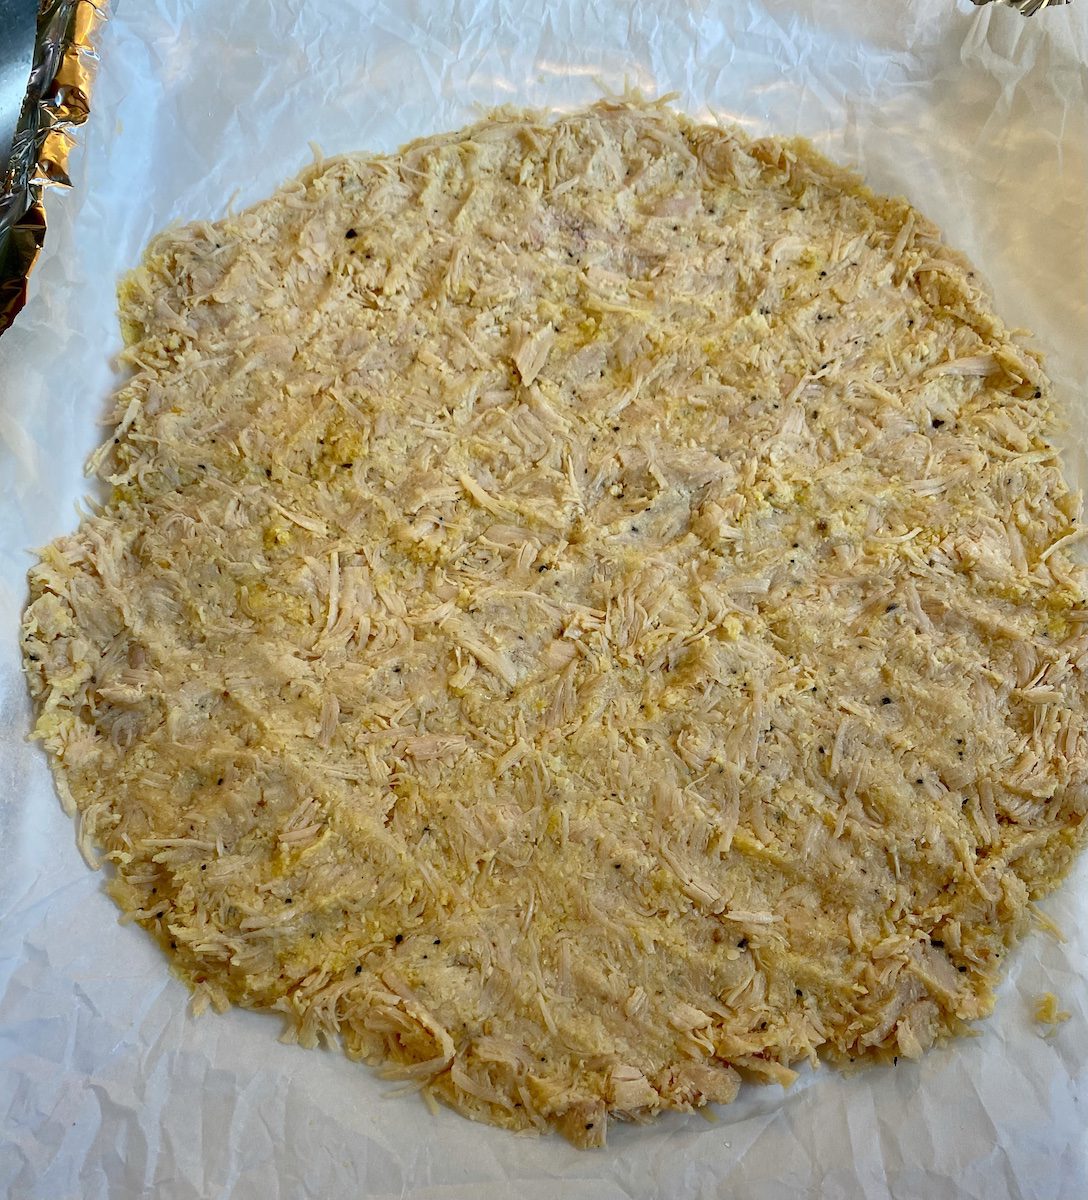 Canned Chicken Pizza Crust Before Baking